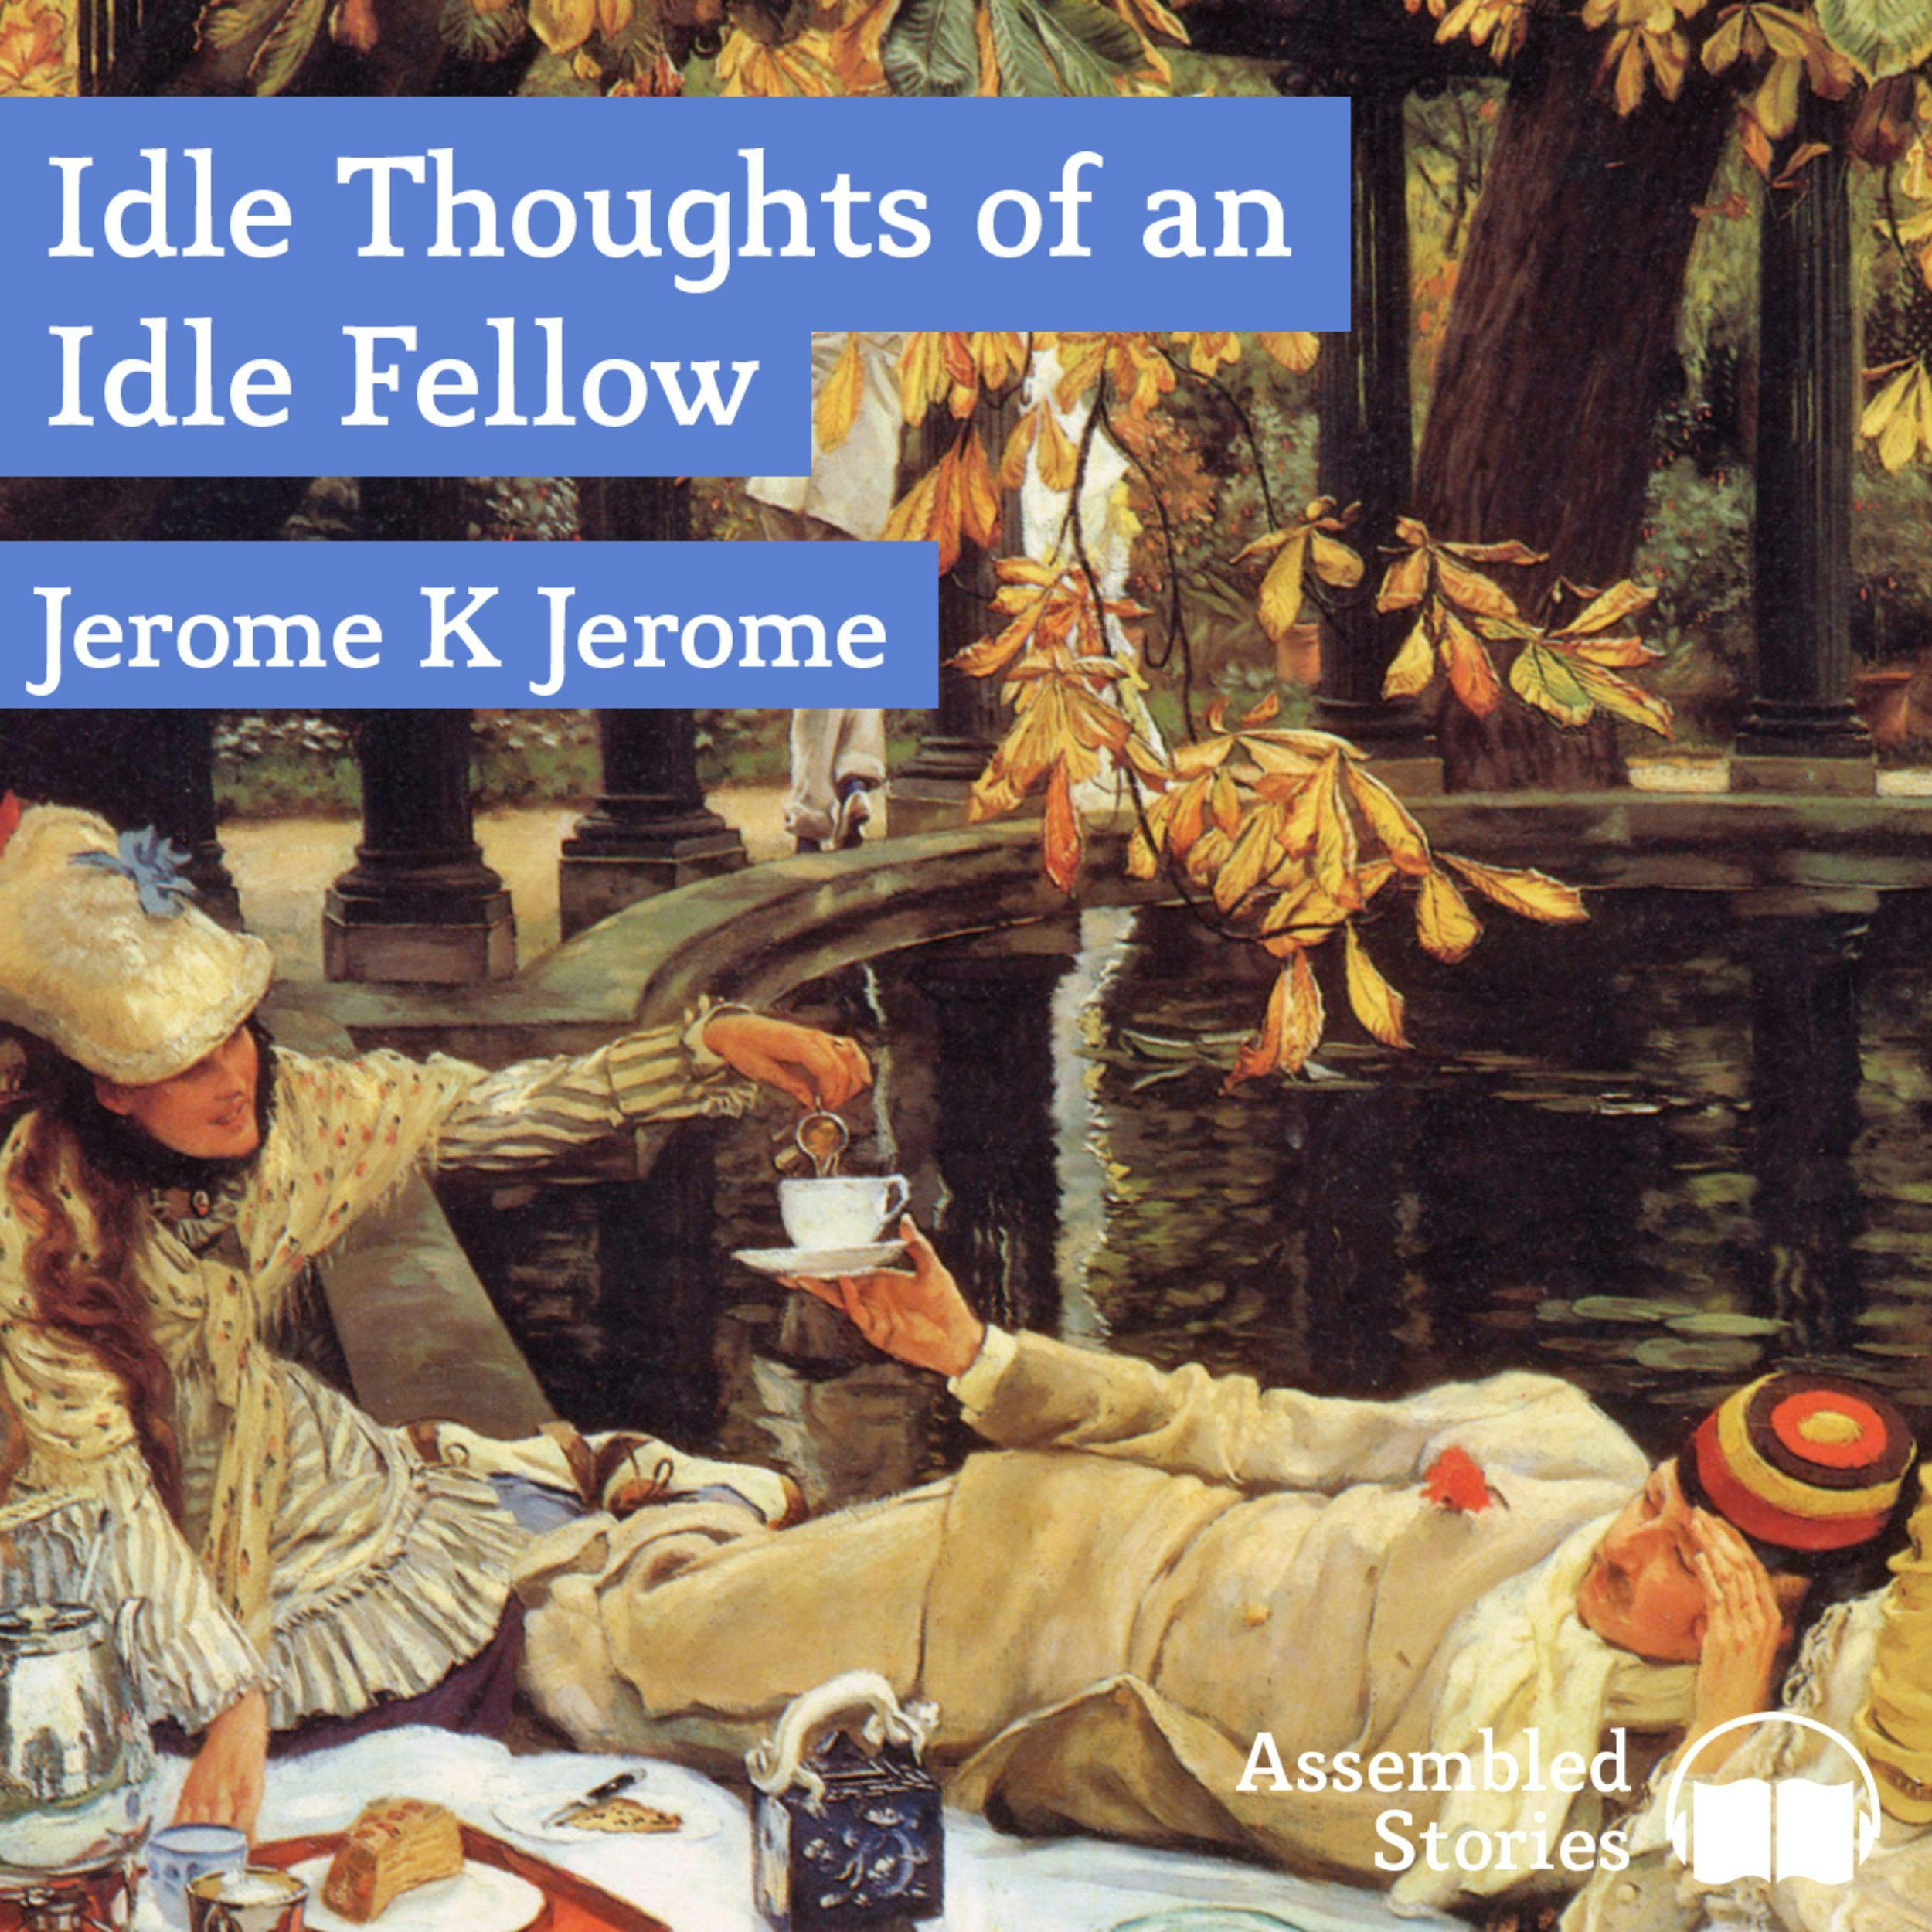 Idle Thoughts of an Idle Fellow - Jerome K. Jerome